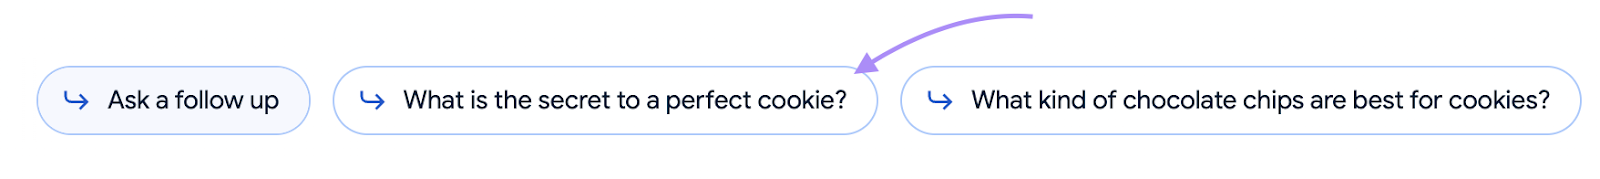 "What is the secret to a perfect cookie?” Google’s suggestion highlighted